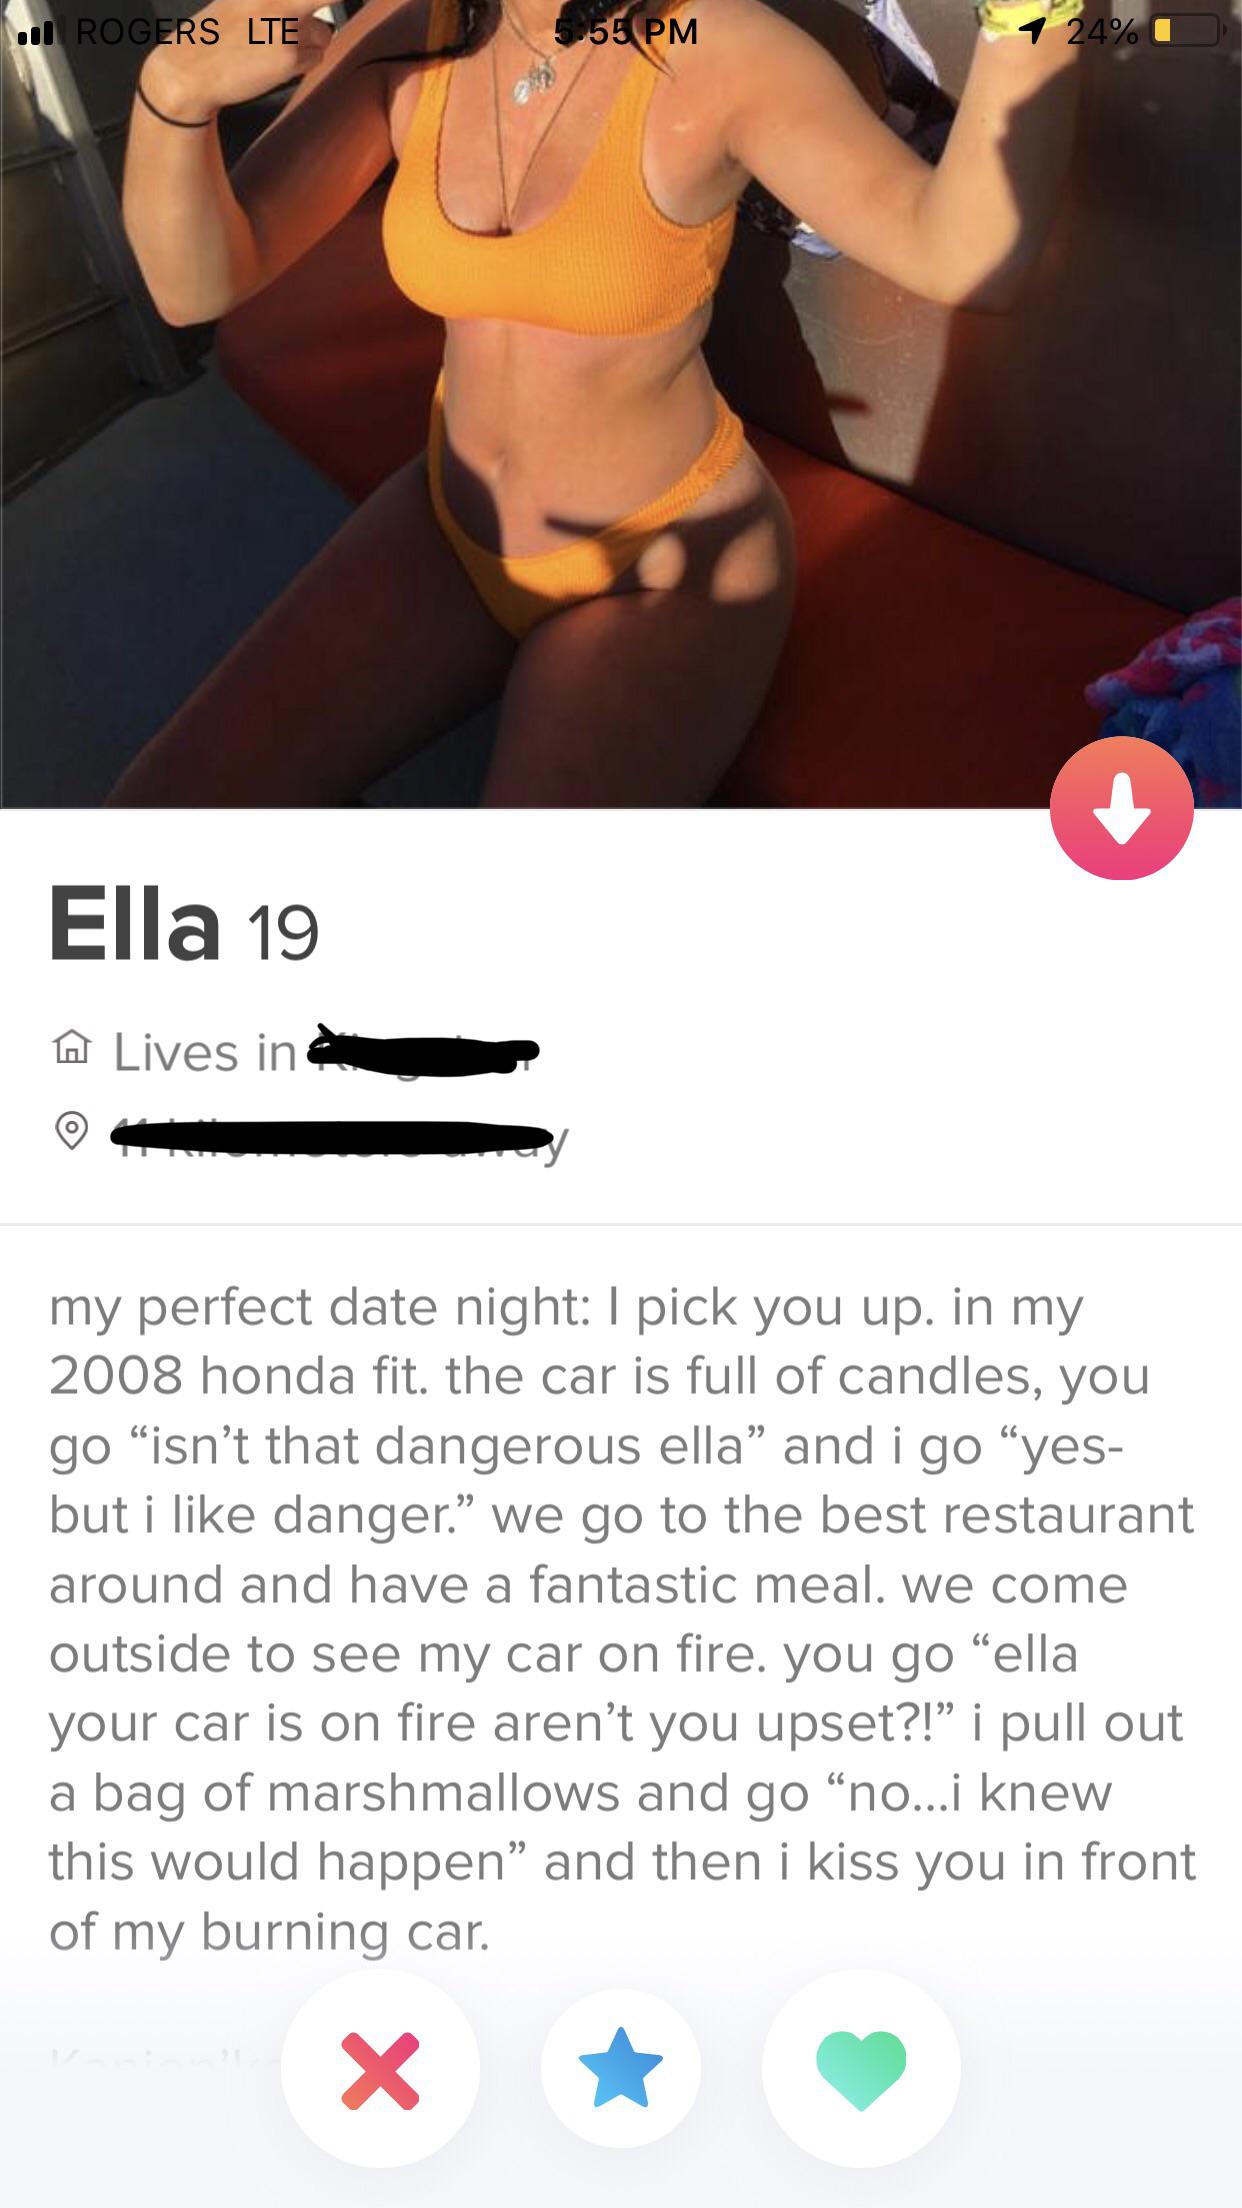 tinder - shoulder - . Rogers Lte 5.55 Pm 1 24% Ella 19 A Lives in my perfect date night I pick you up. in my 2008 honda fit. the car is full of candles, you go isn't that dangerous ella and i go yes but i danger. we go to the best restaurant around and ha